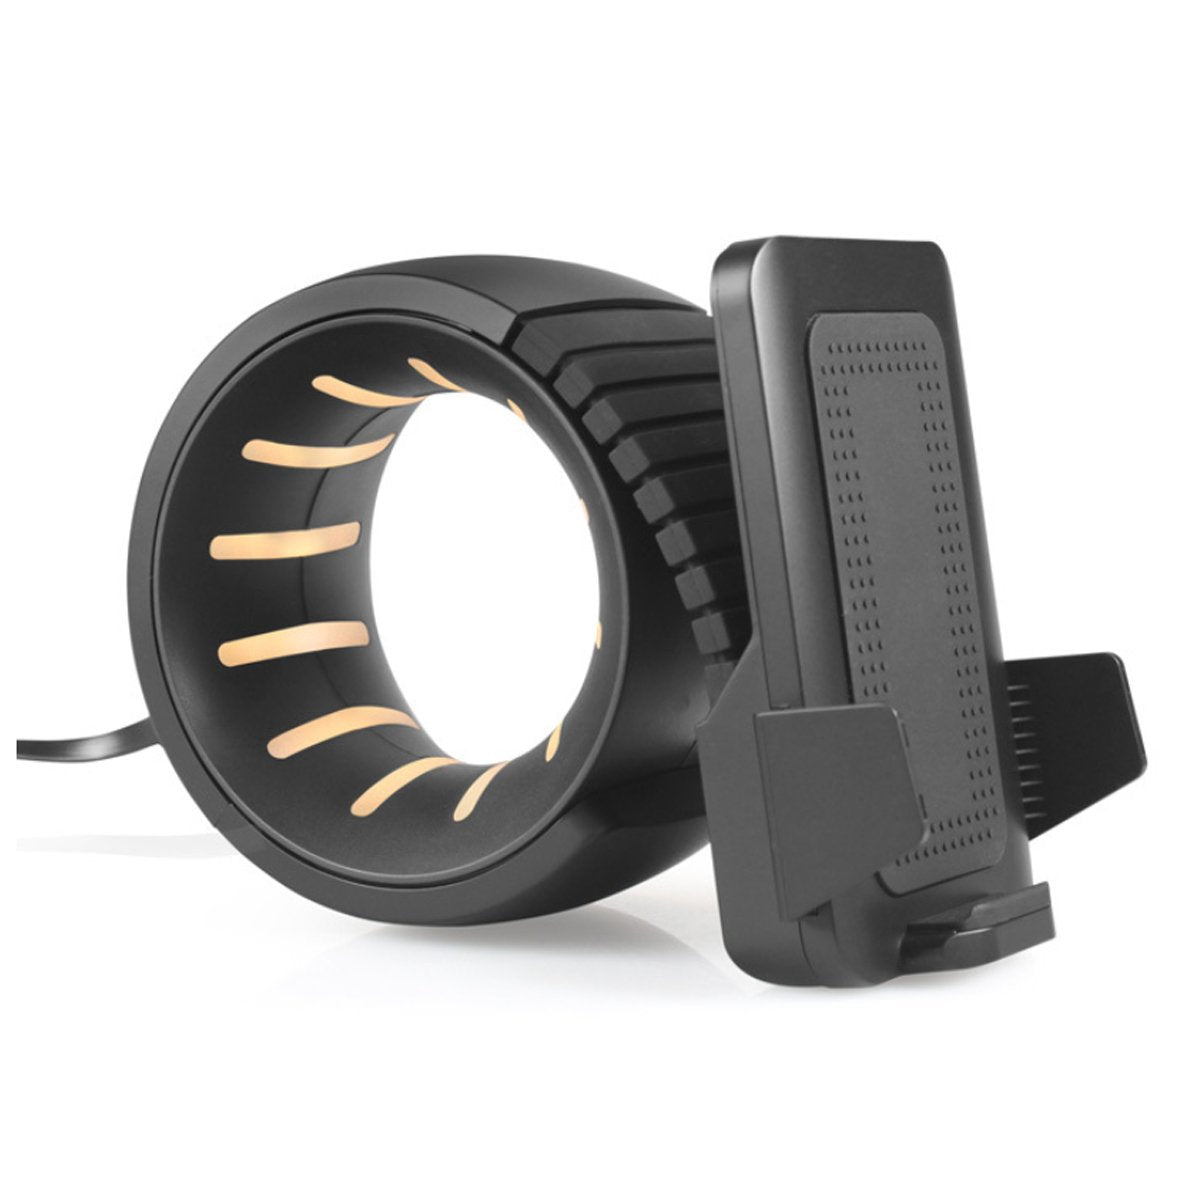 Wheel Of Power Mobile Wireless Charger